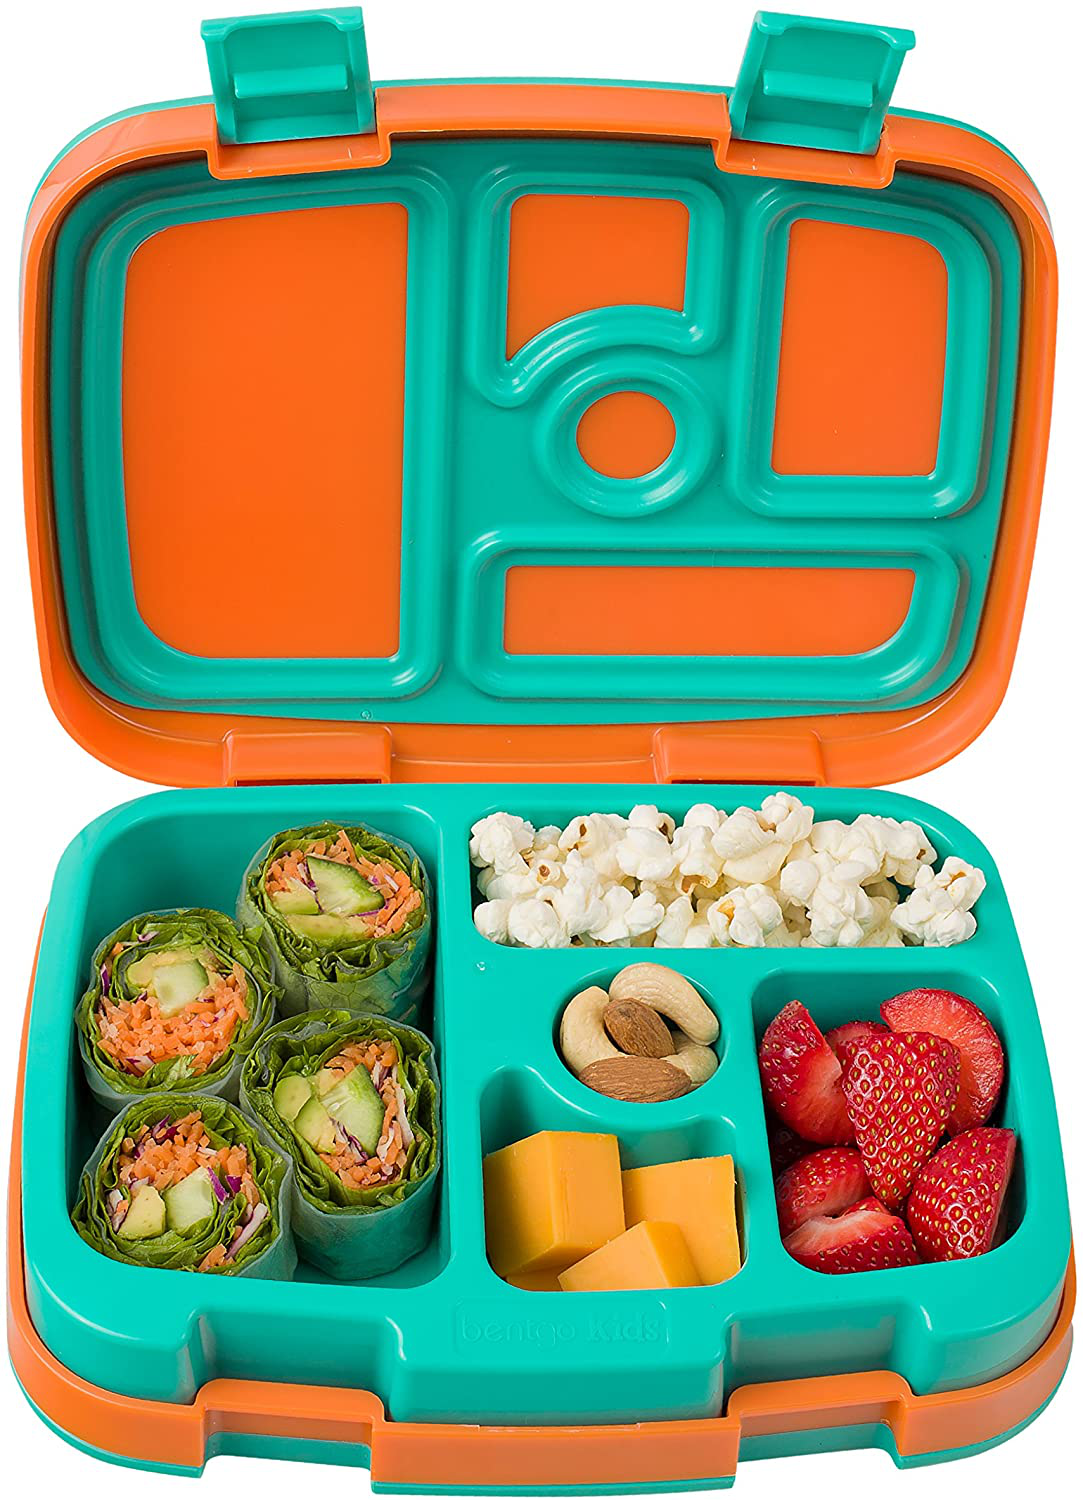 Bentgo Kids Brights – Leak-Proof, 5-Compartment Bento-Style Kids Lunch Box – Ideal Portion Sizes for Ages 3 to 7 – BPA-Free, Dishwasher Safe, Food-Safe Materials